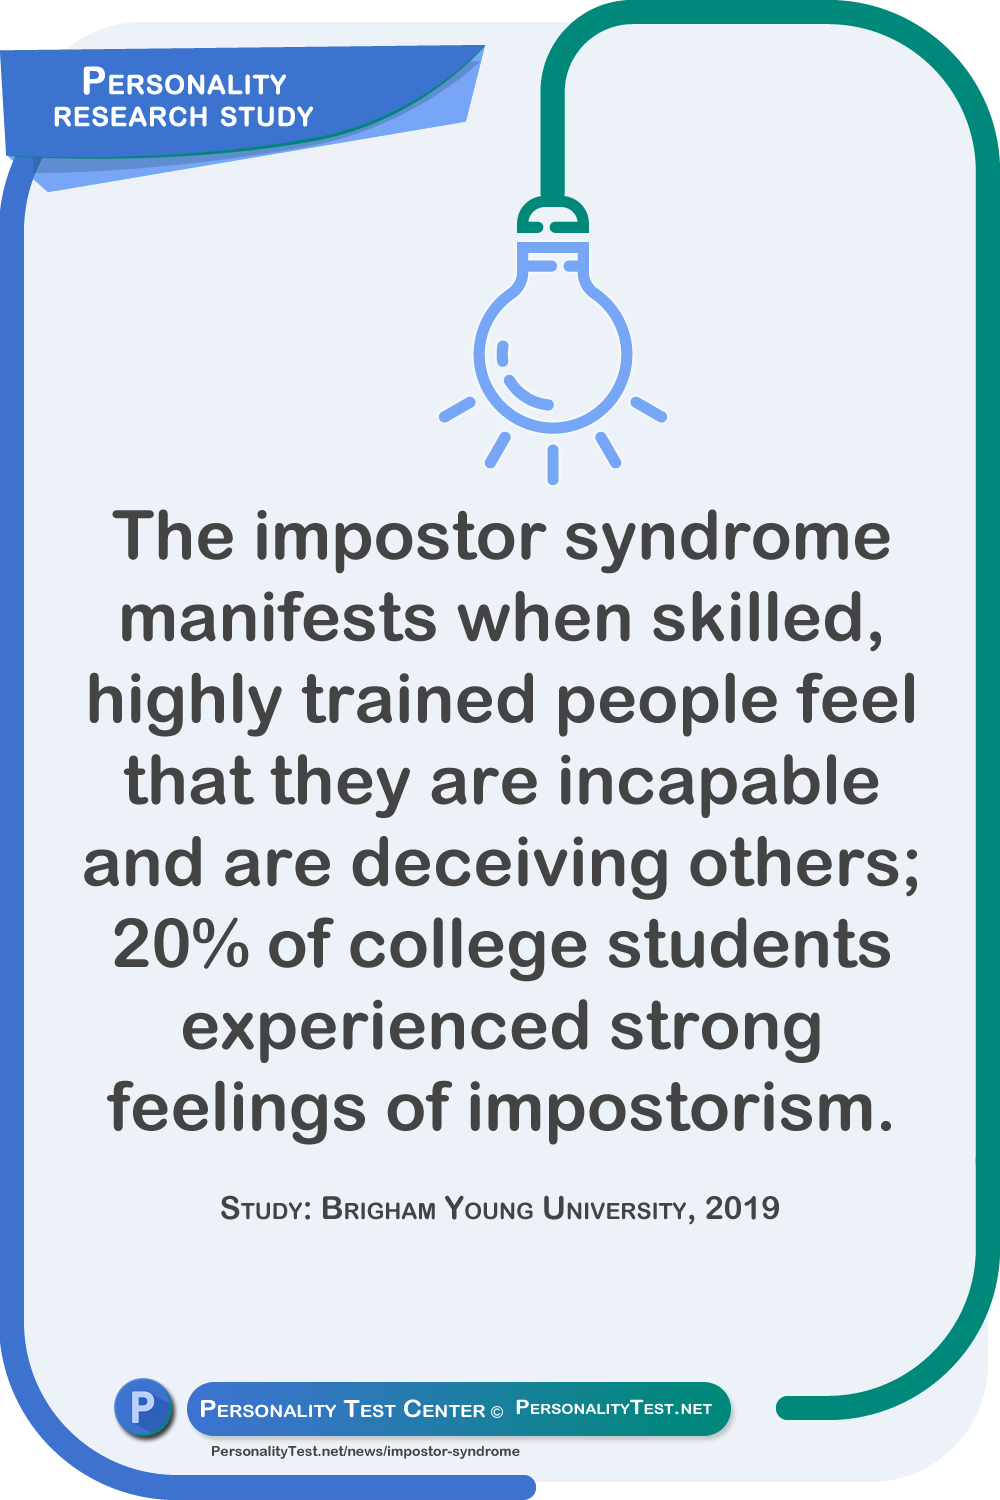 The impostor syndrome manifests when skilled, highly trained people feel that they are incapable and are deceiving others; 20% of college students experienced strong feelings of impostorism. Study: Brigham Young University, 2019